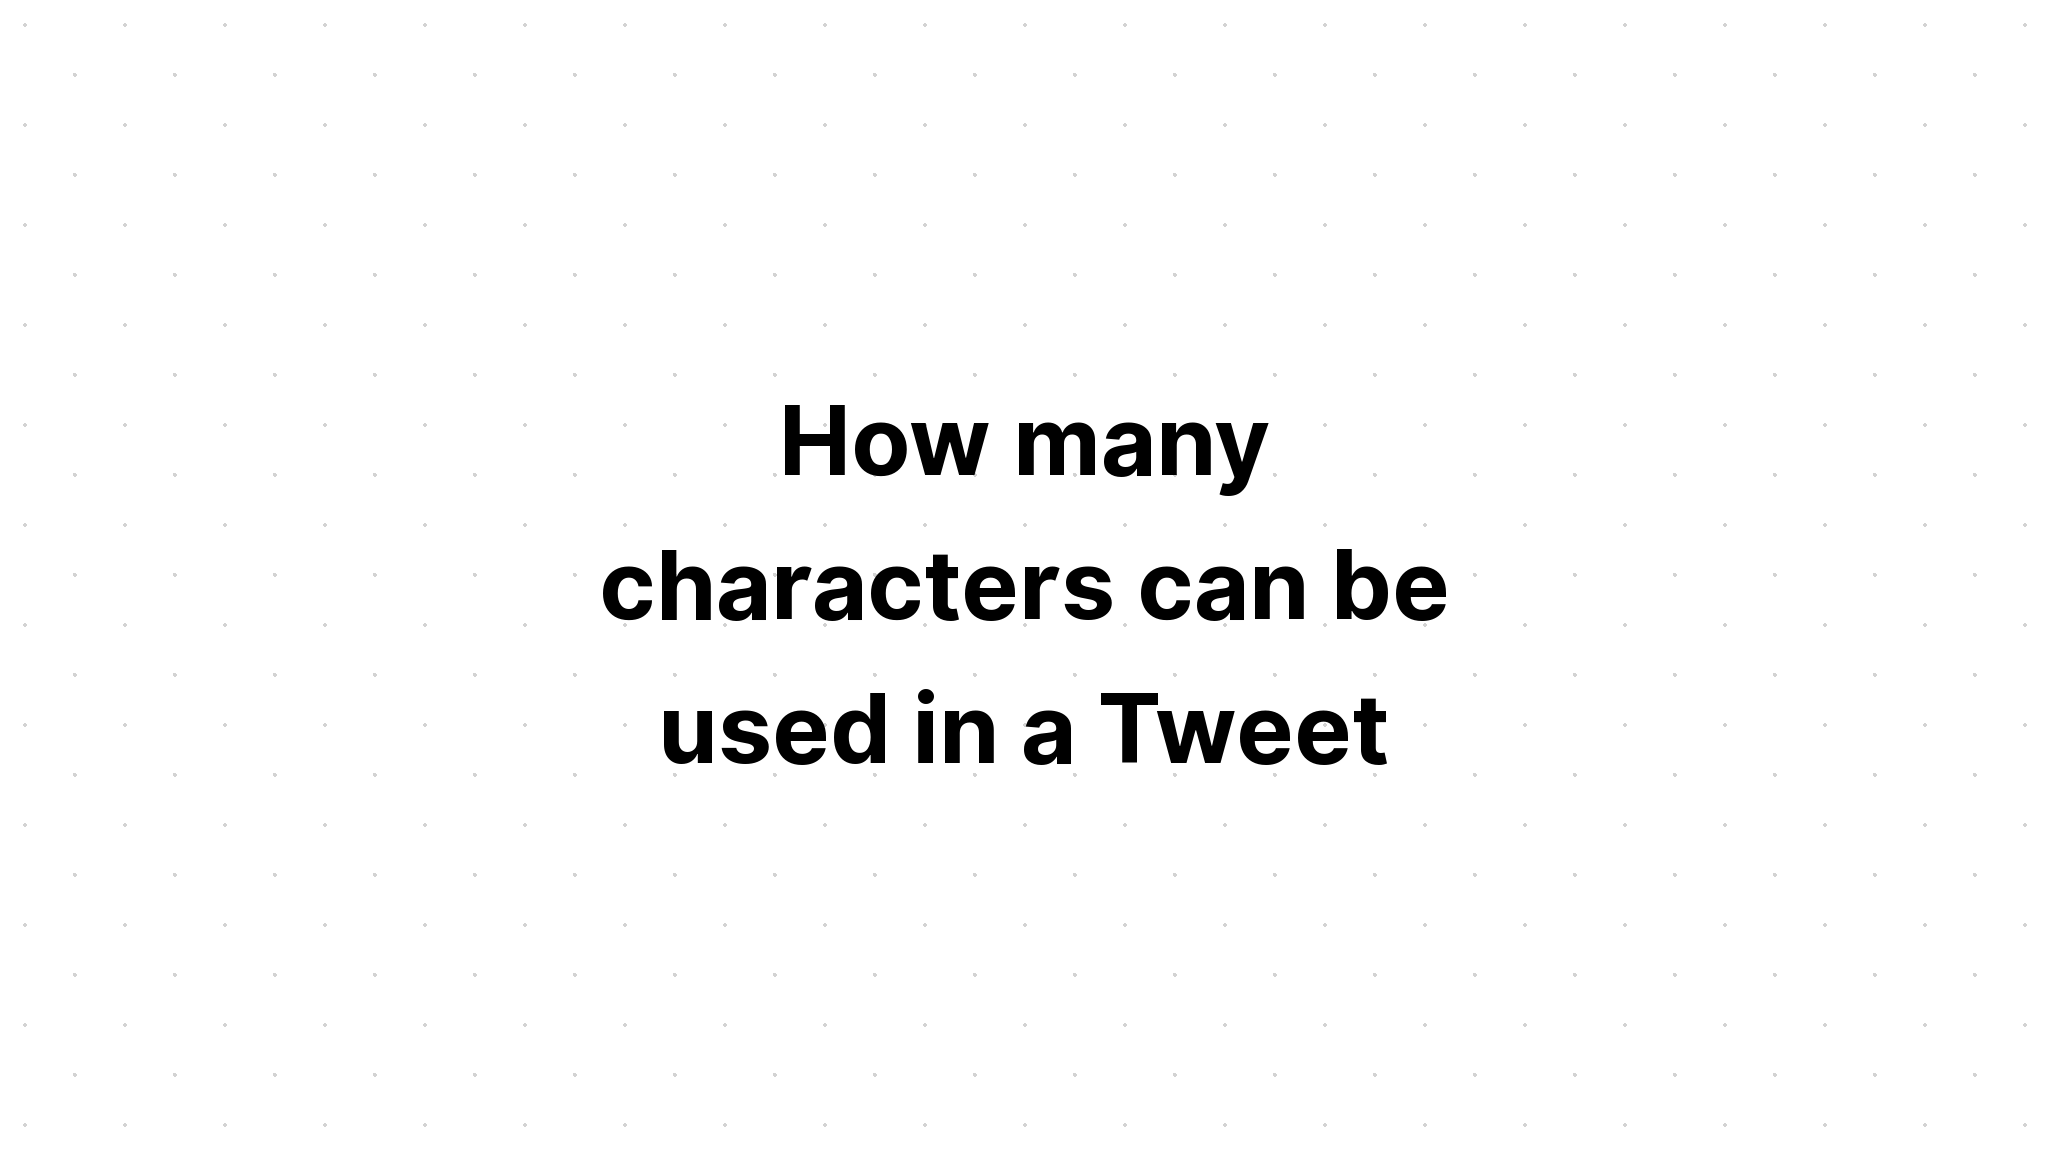 How many characters can be used in a Tweet?